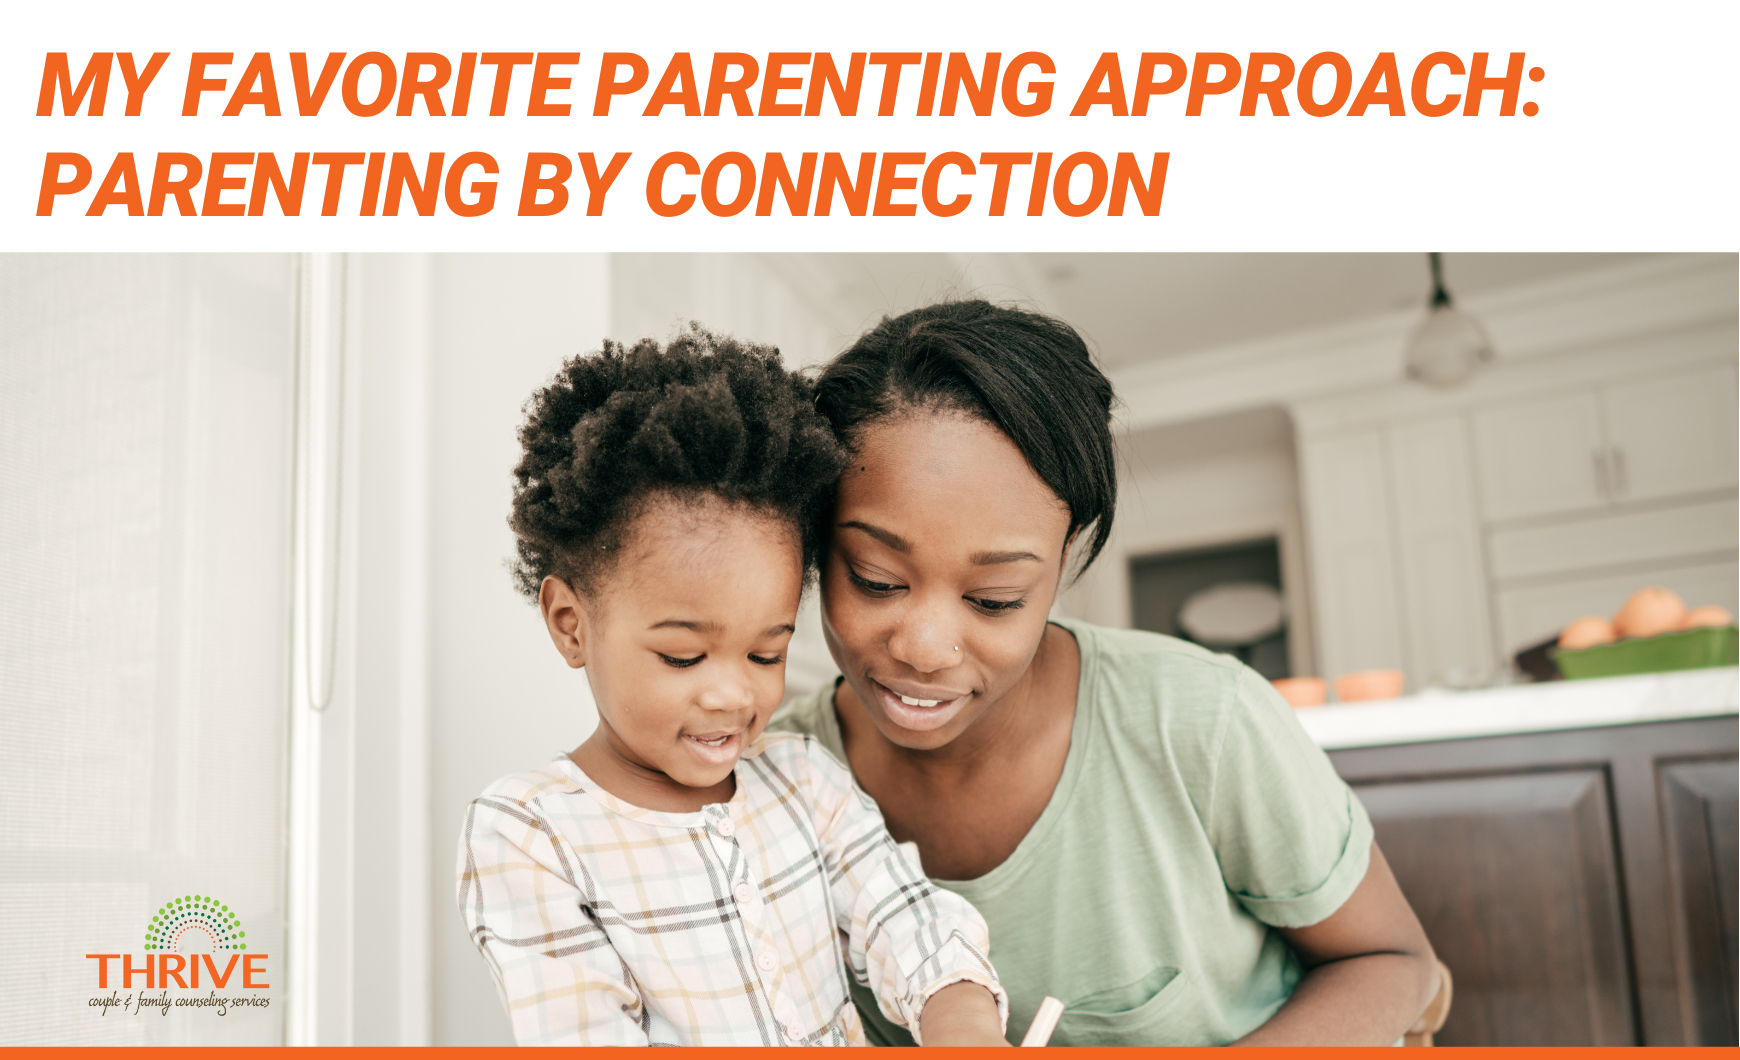 Dark orange text that reads "My Favorite Parenting Approach-Parenting by Connection" above a stock photo of a Black woman and child playing together.